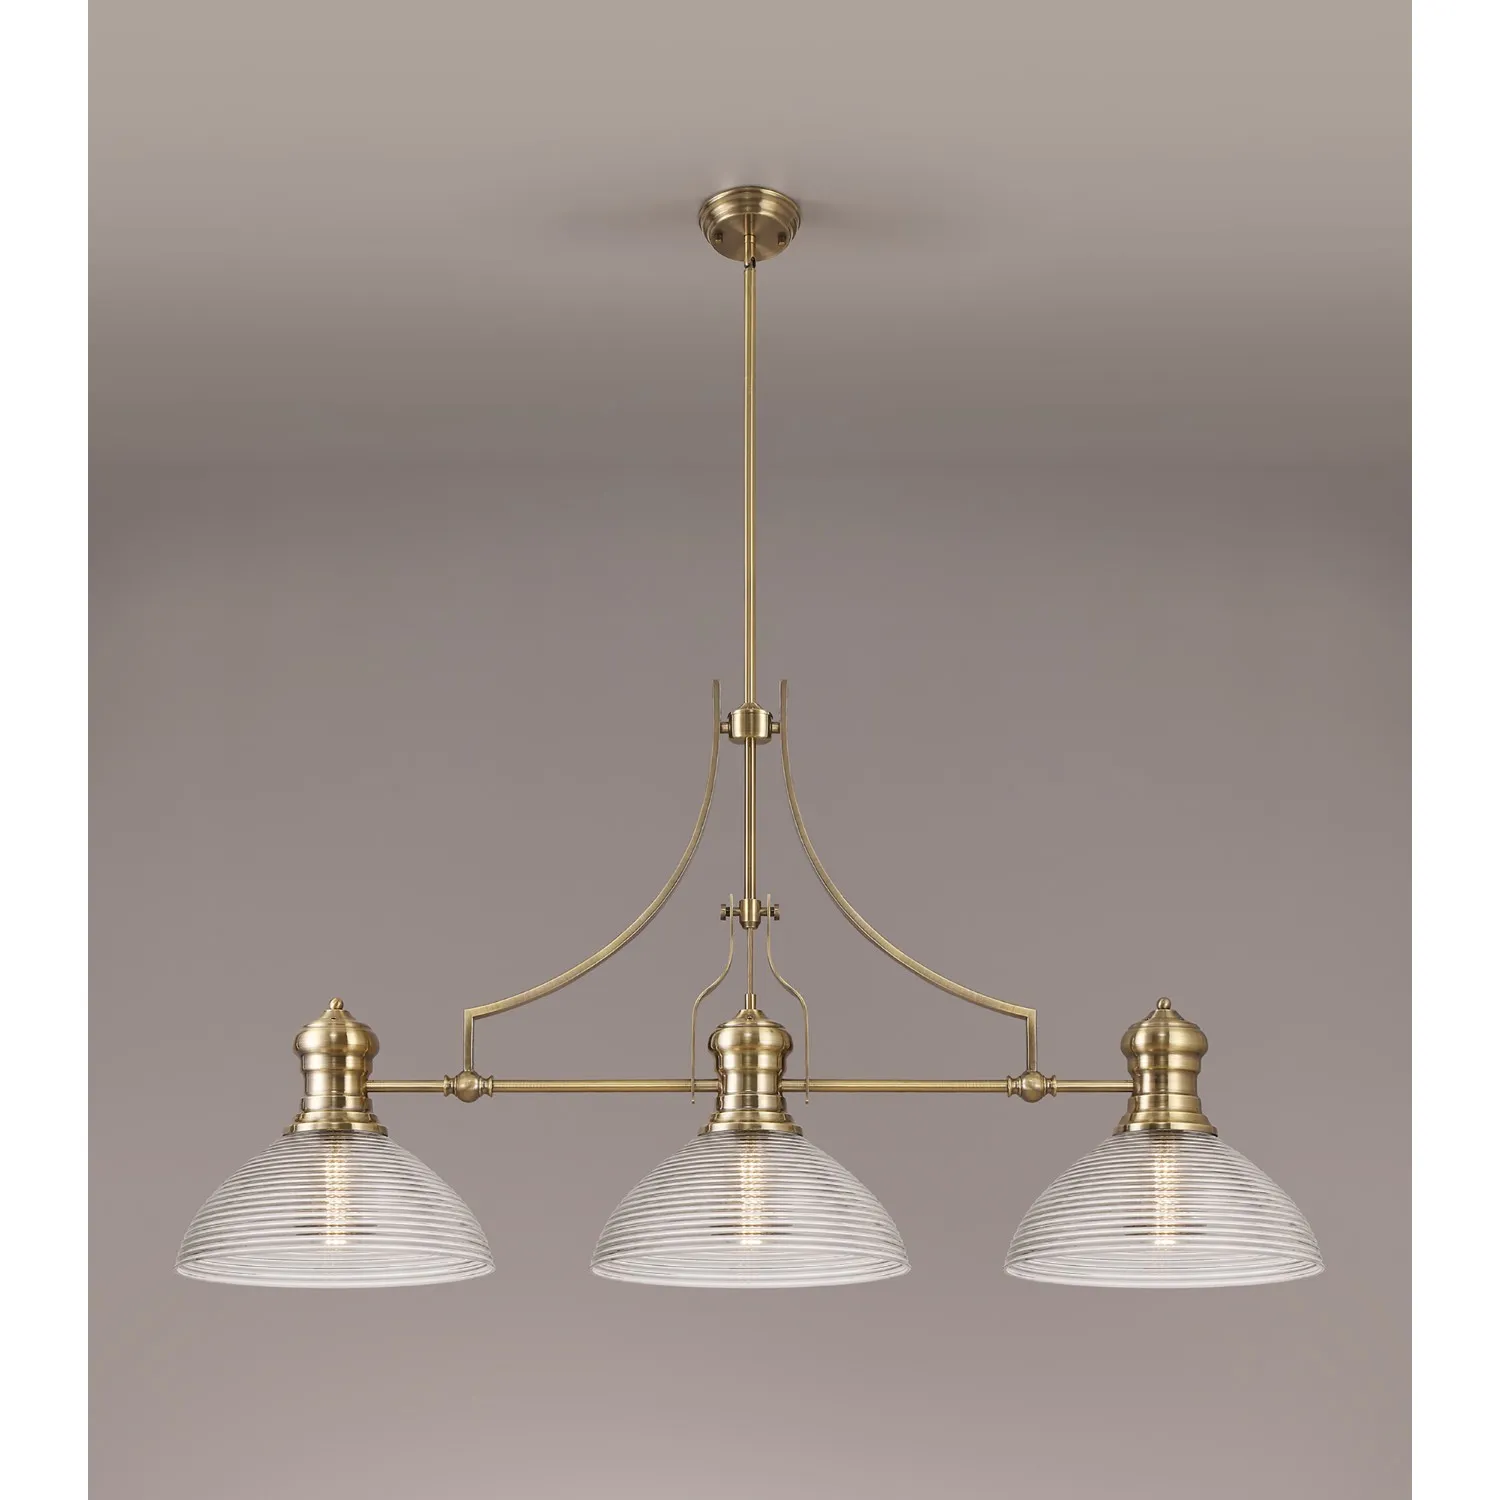 Sandy 3 Light Linear Pendant E27 With 33.5cm Prismatic Glass Shade, Antique Brass, Clear